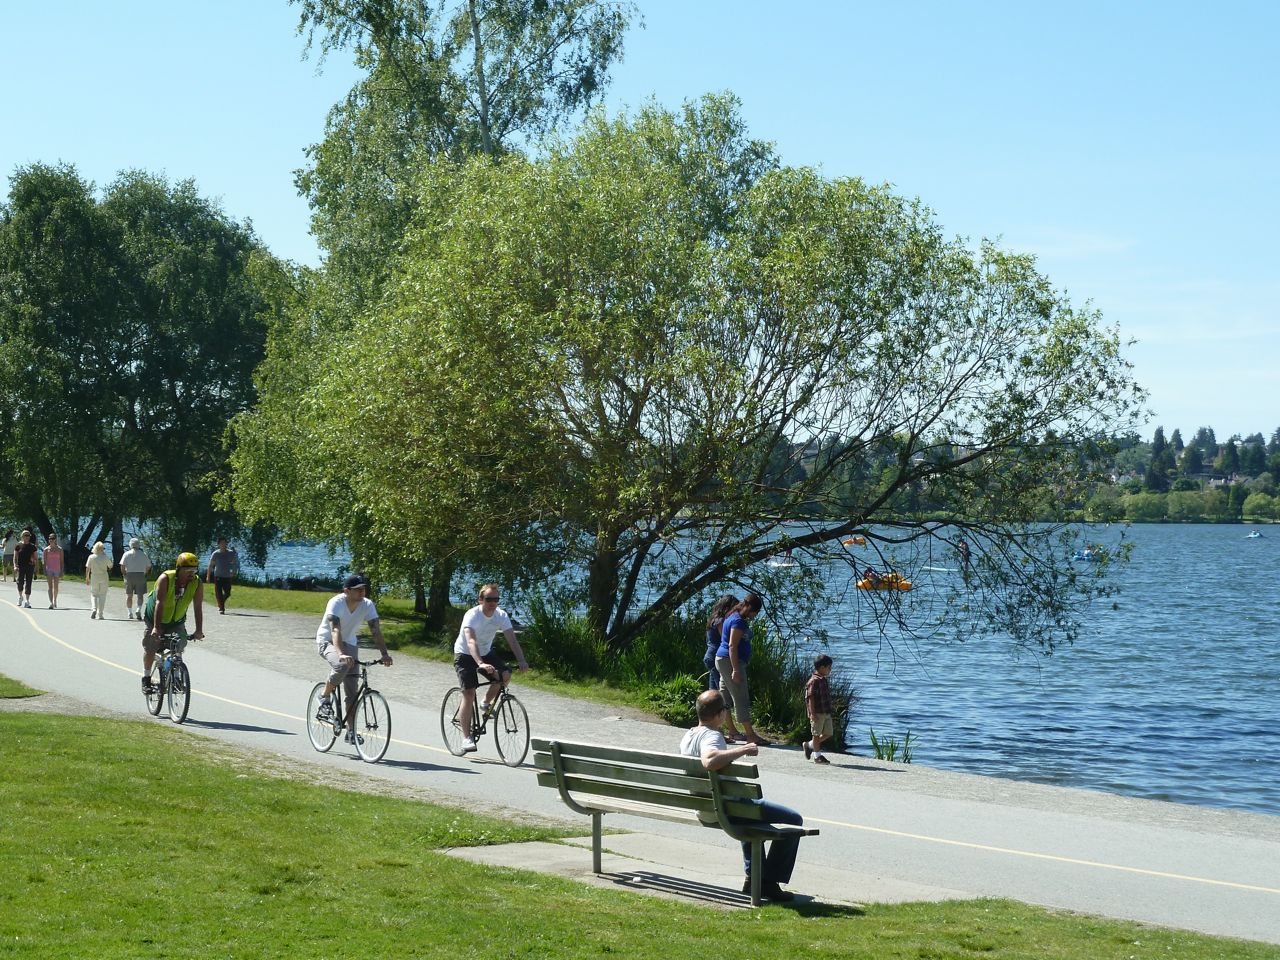 A man sitting on a bench, watching a busy bike path.